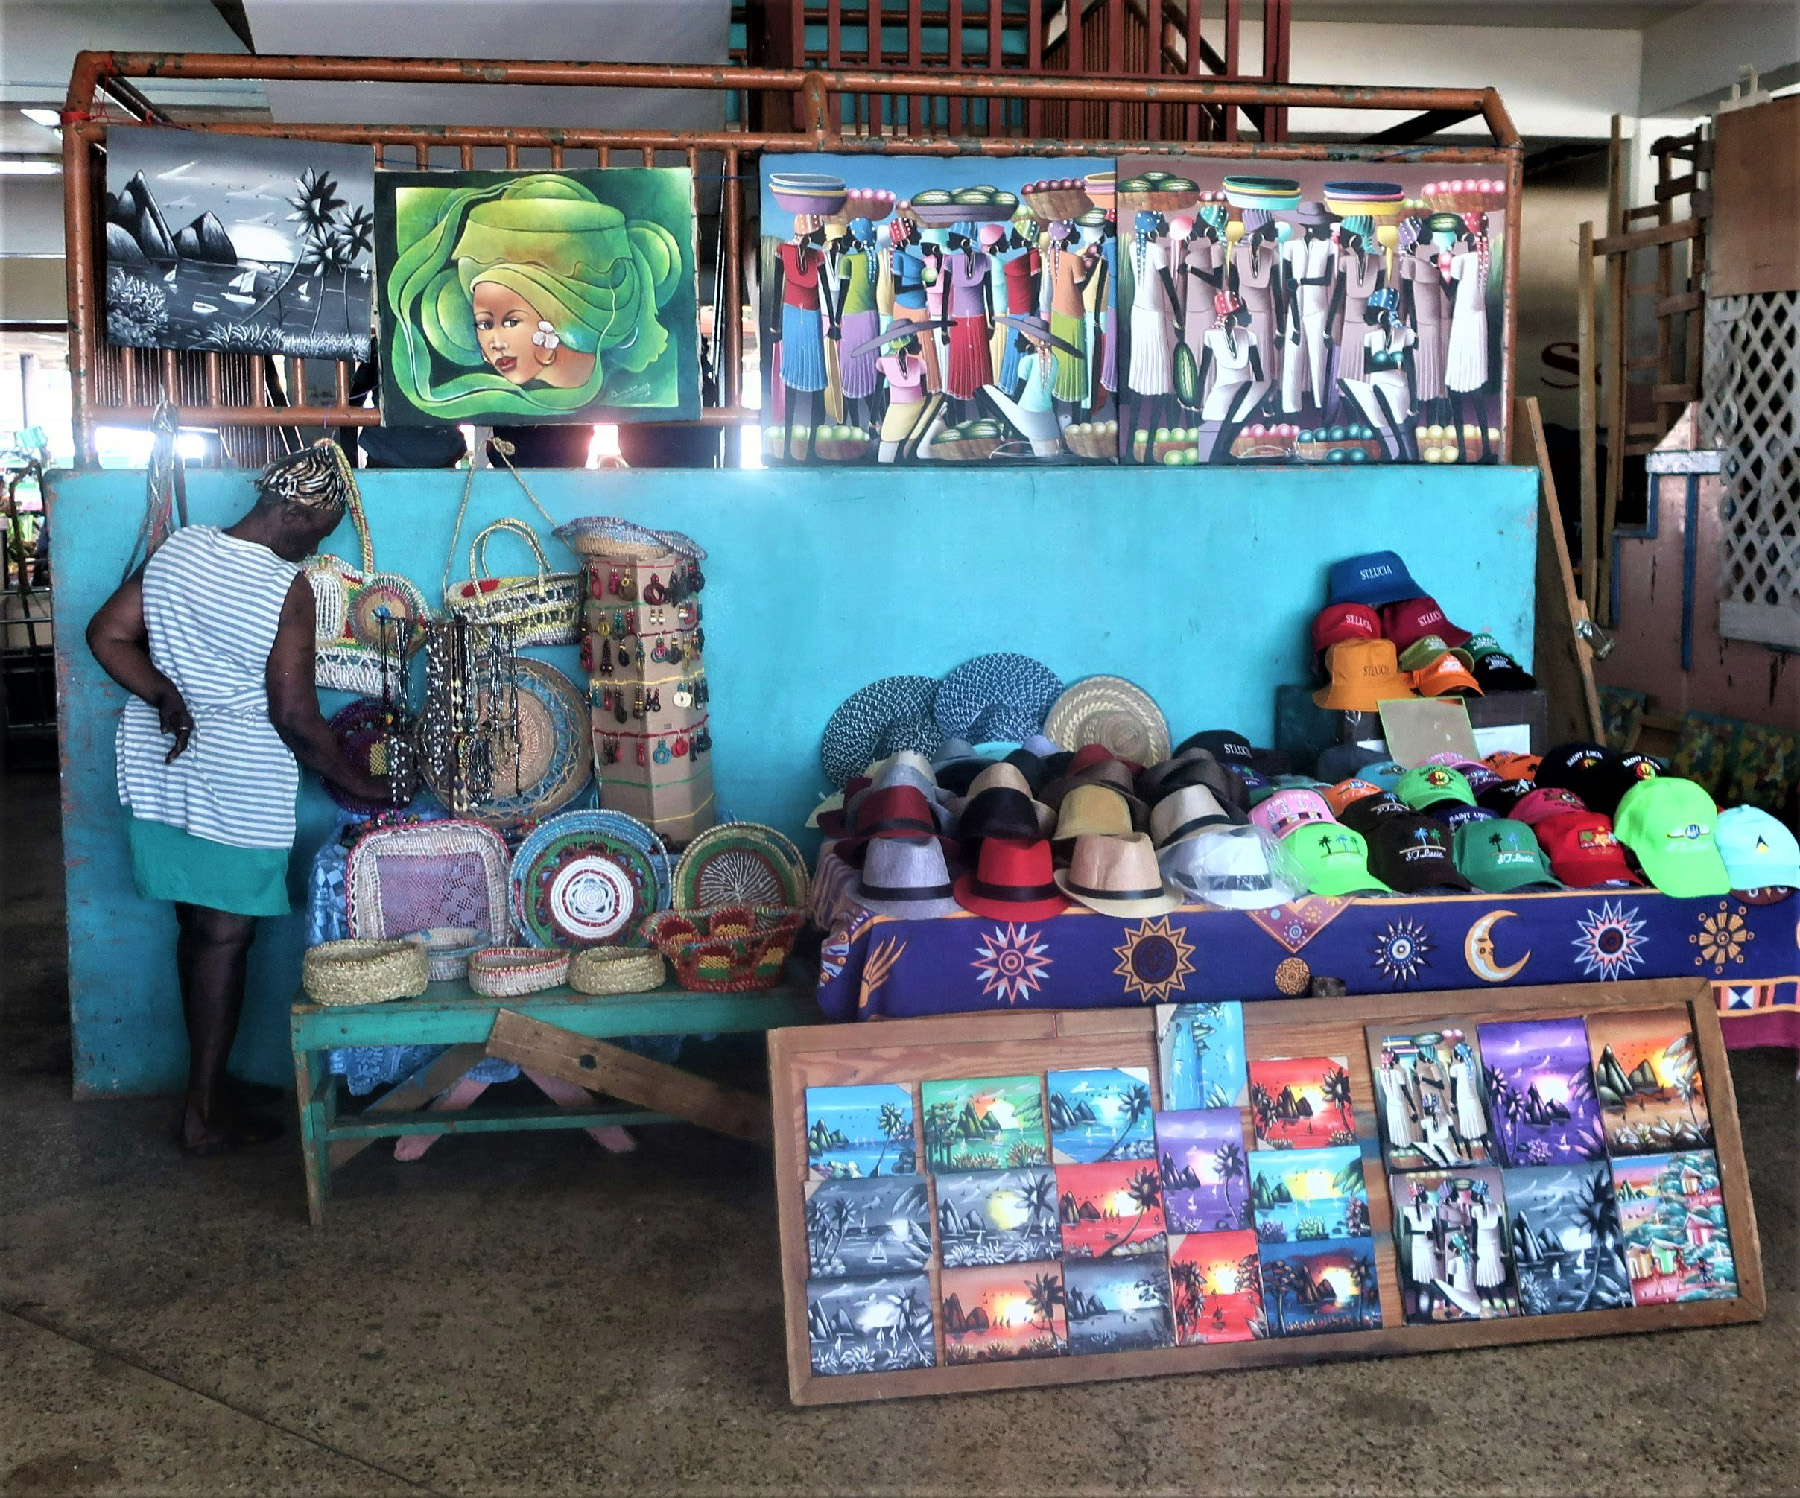 A shopper examines merchandise at the Castries Market in St. Lucia.